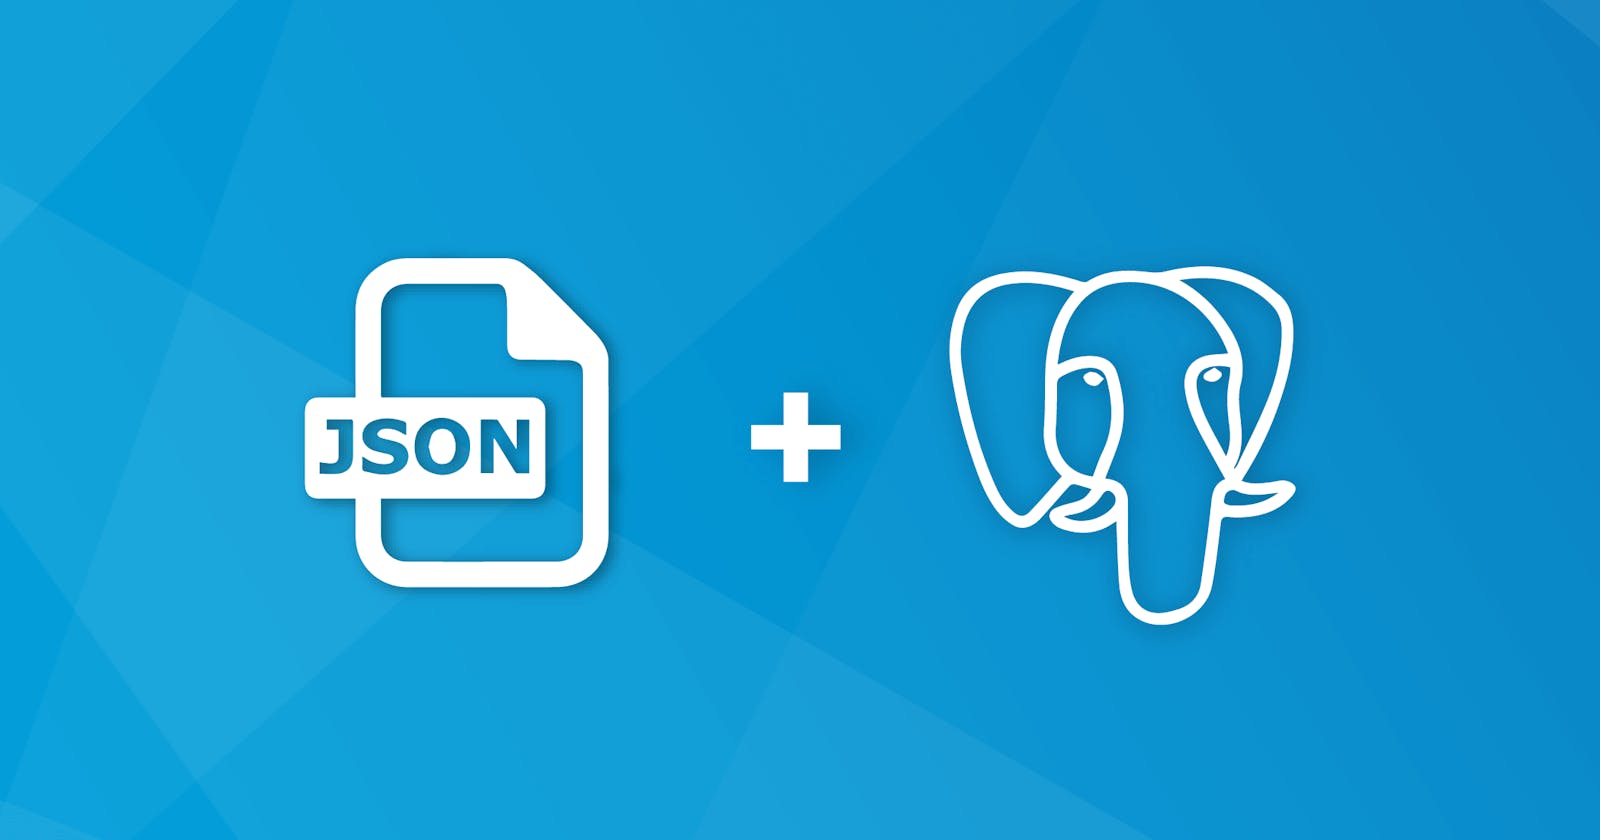 Postgres JSON functions and how to use them